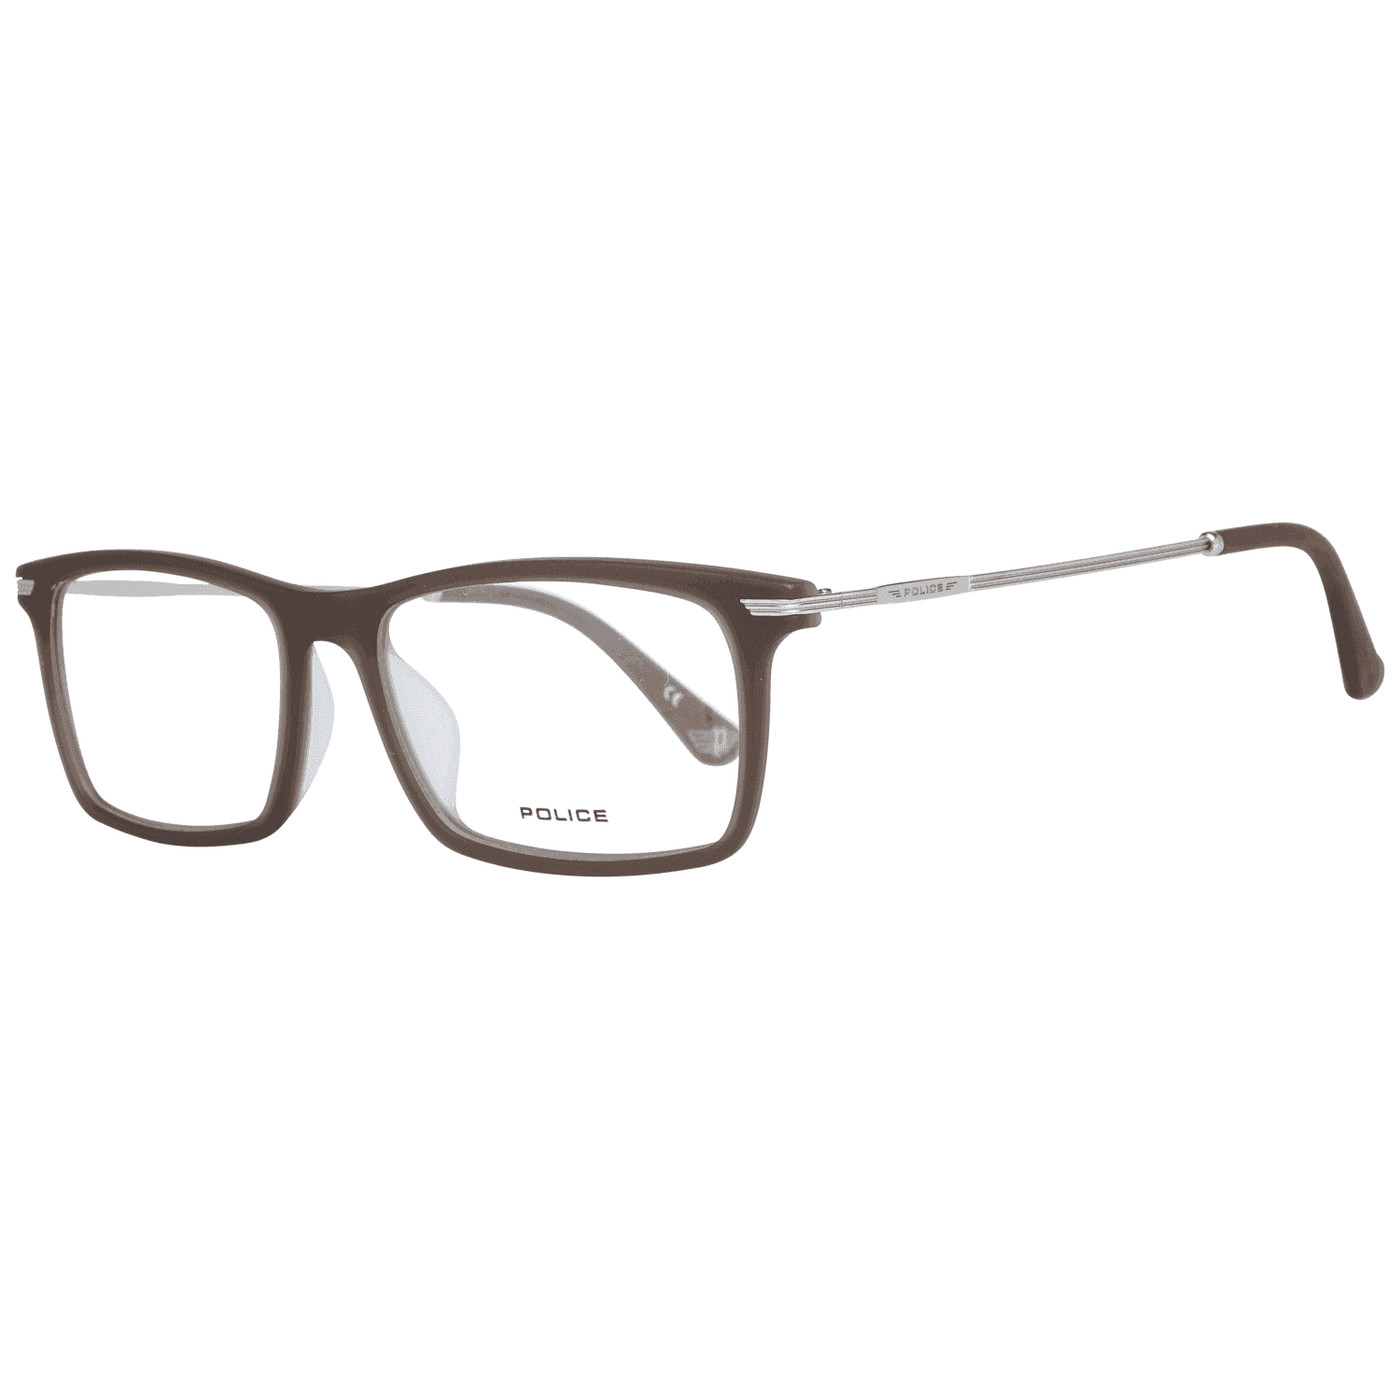 Police Men Optical Frames #men, Brown, Catch, feed-agegroup-adult, feed-color-brown, feed-gender-male, feed-size-OS, Frames for Men - Frames, Gender_Men, Kogan, Police at SEYMAYKA